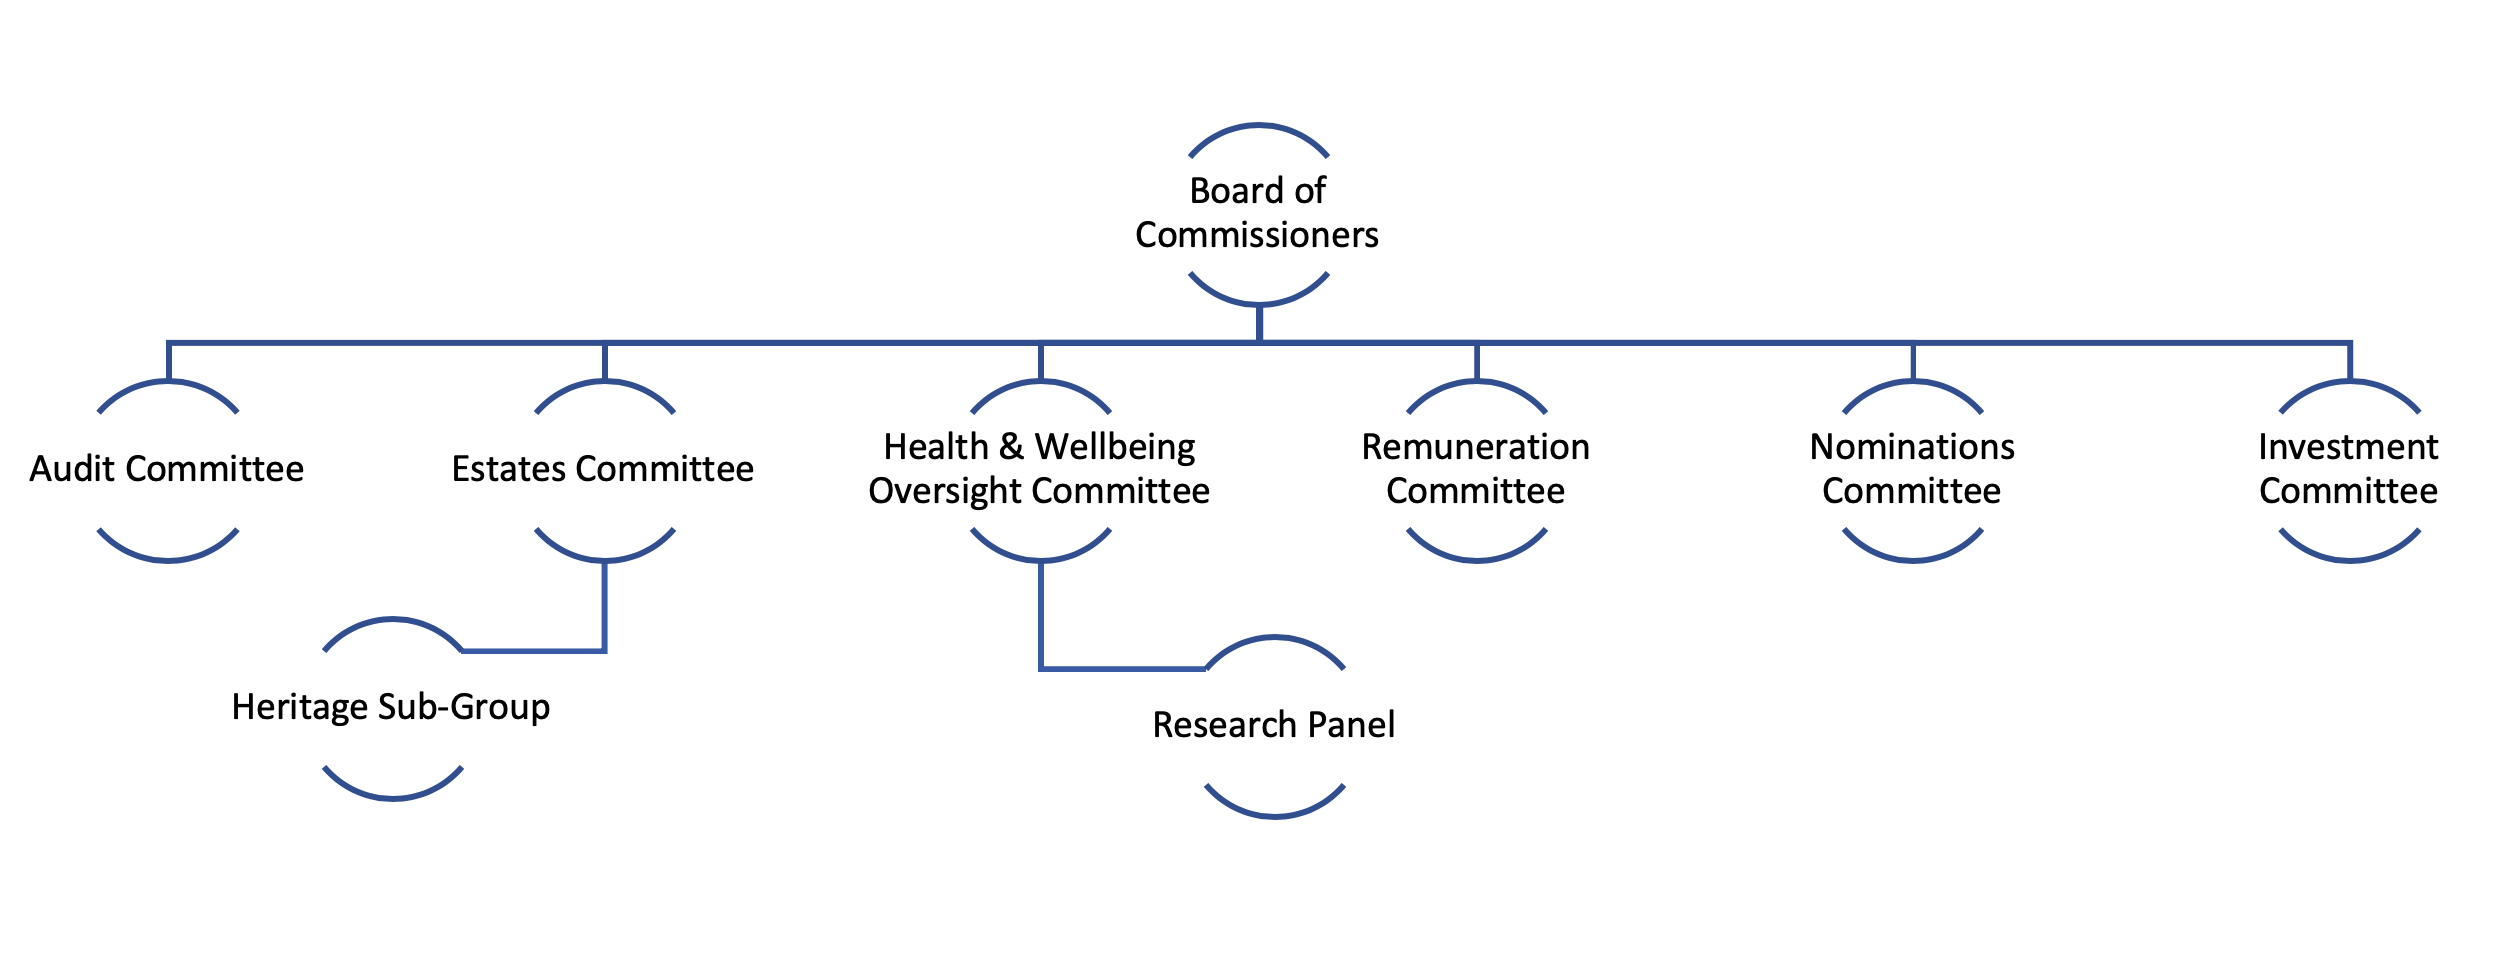 Board of Commissioners Structure